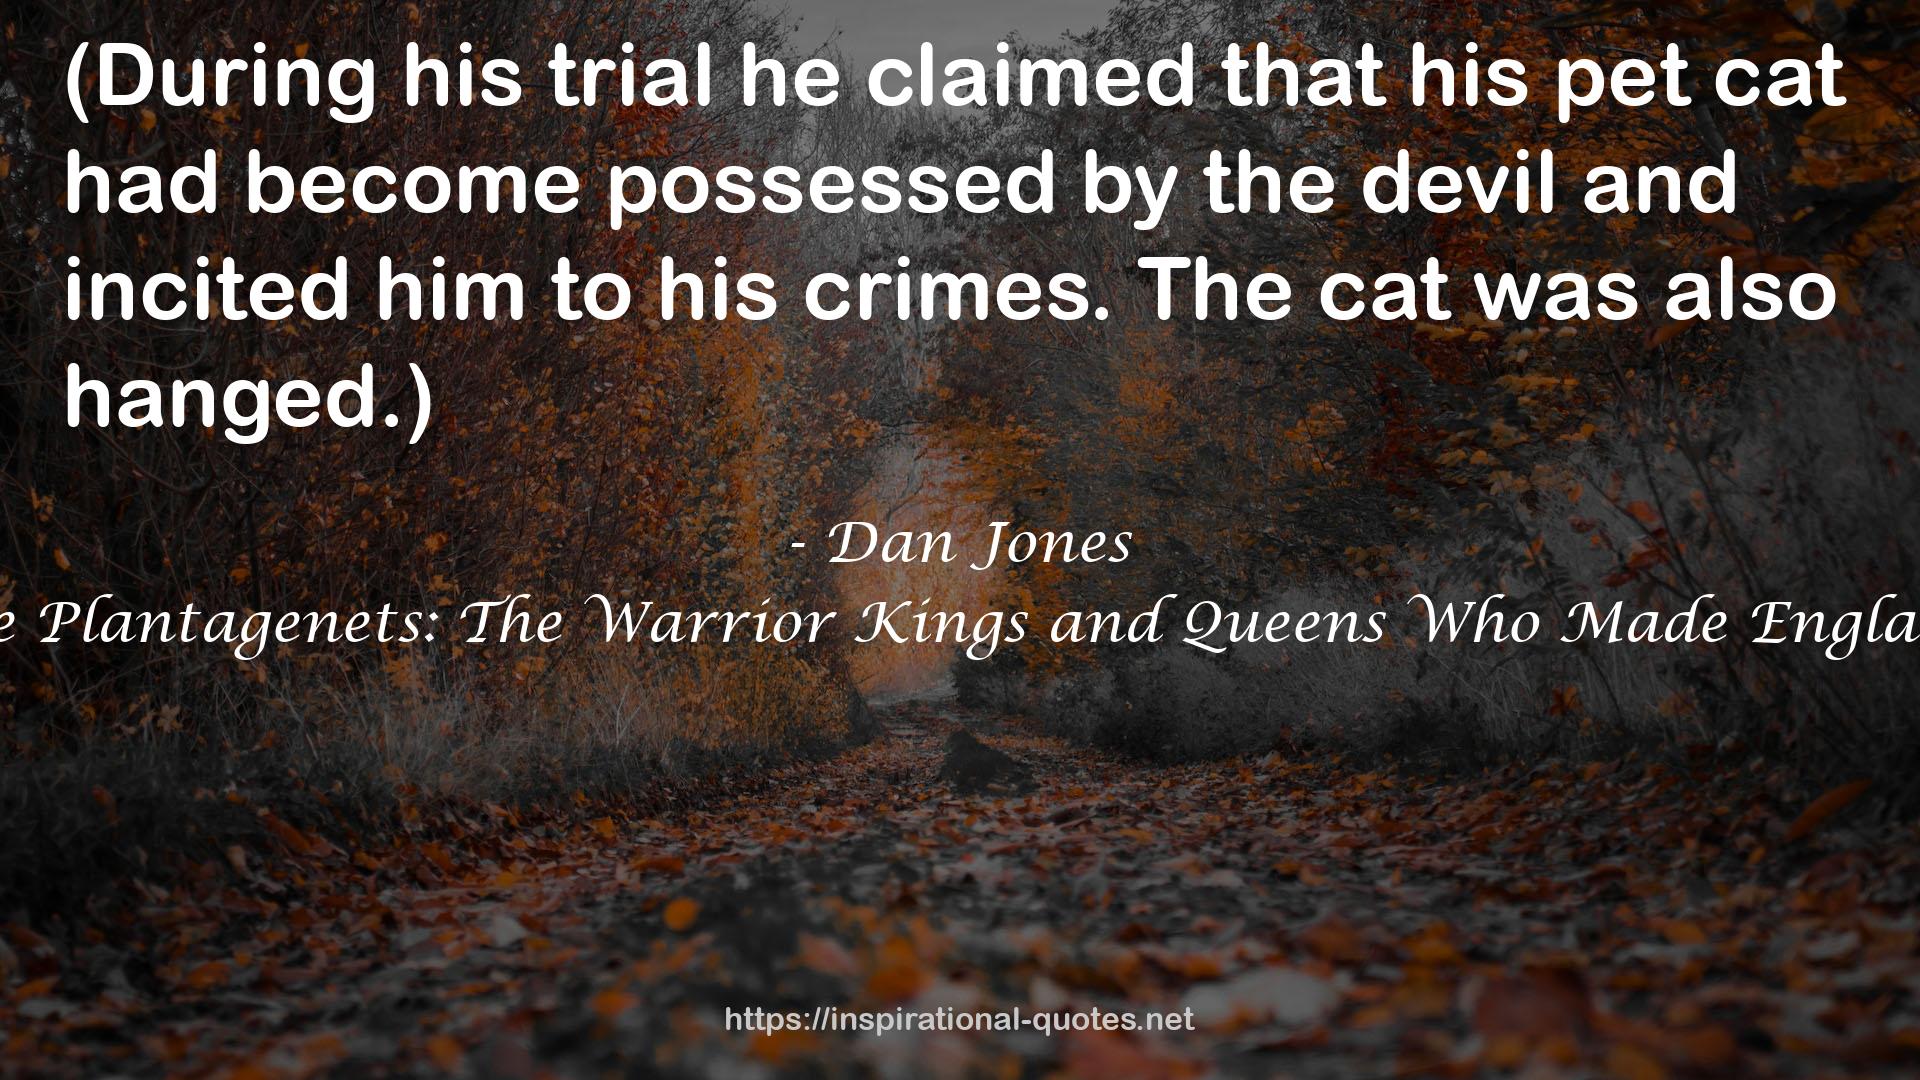 The Plantagenets: The Warrior Kings and Queens Who Made England QUOTES